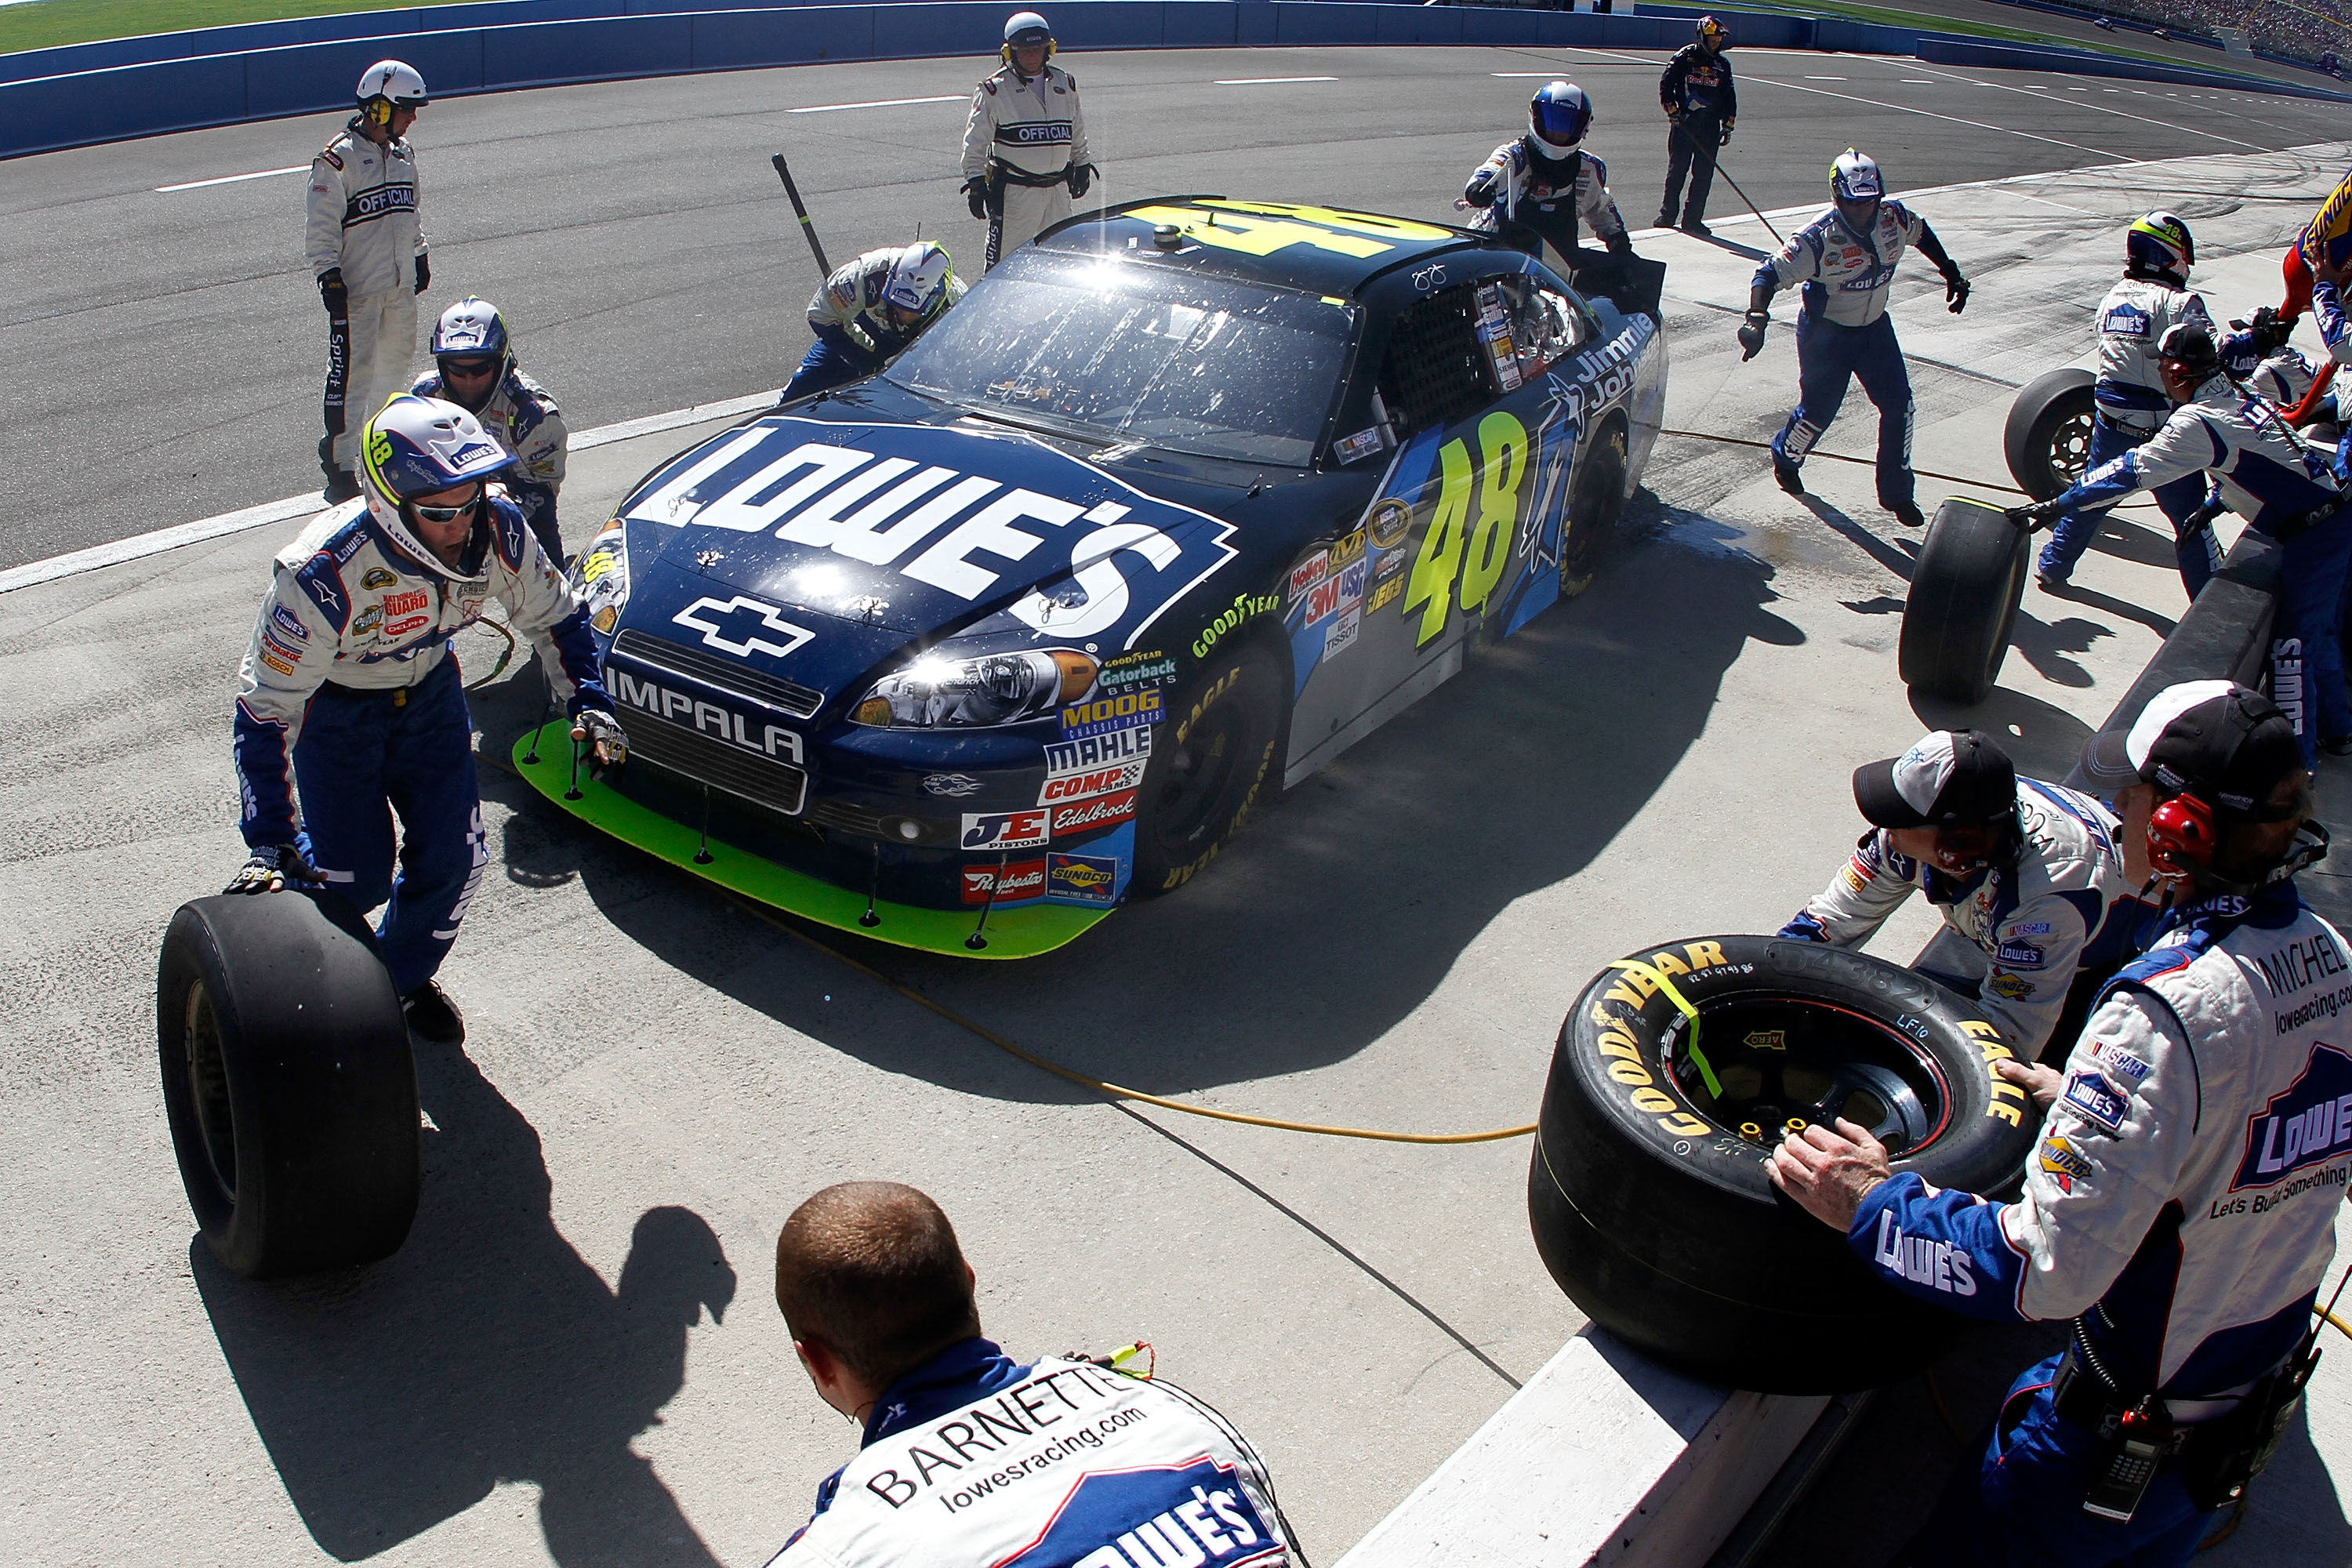 FONTANA, CA - OCTOBER 10:  Jimmie Johnson, driver of the #48 Lowe's/Jimmie Johnson Foundation Chevrolet, makes a pit stop during the NASCAR Sprint Cup Series Pepsi Max 400 on October 10, 2010 in Fontana, California.  (Photo by Jason Smith/Getty Images for